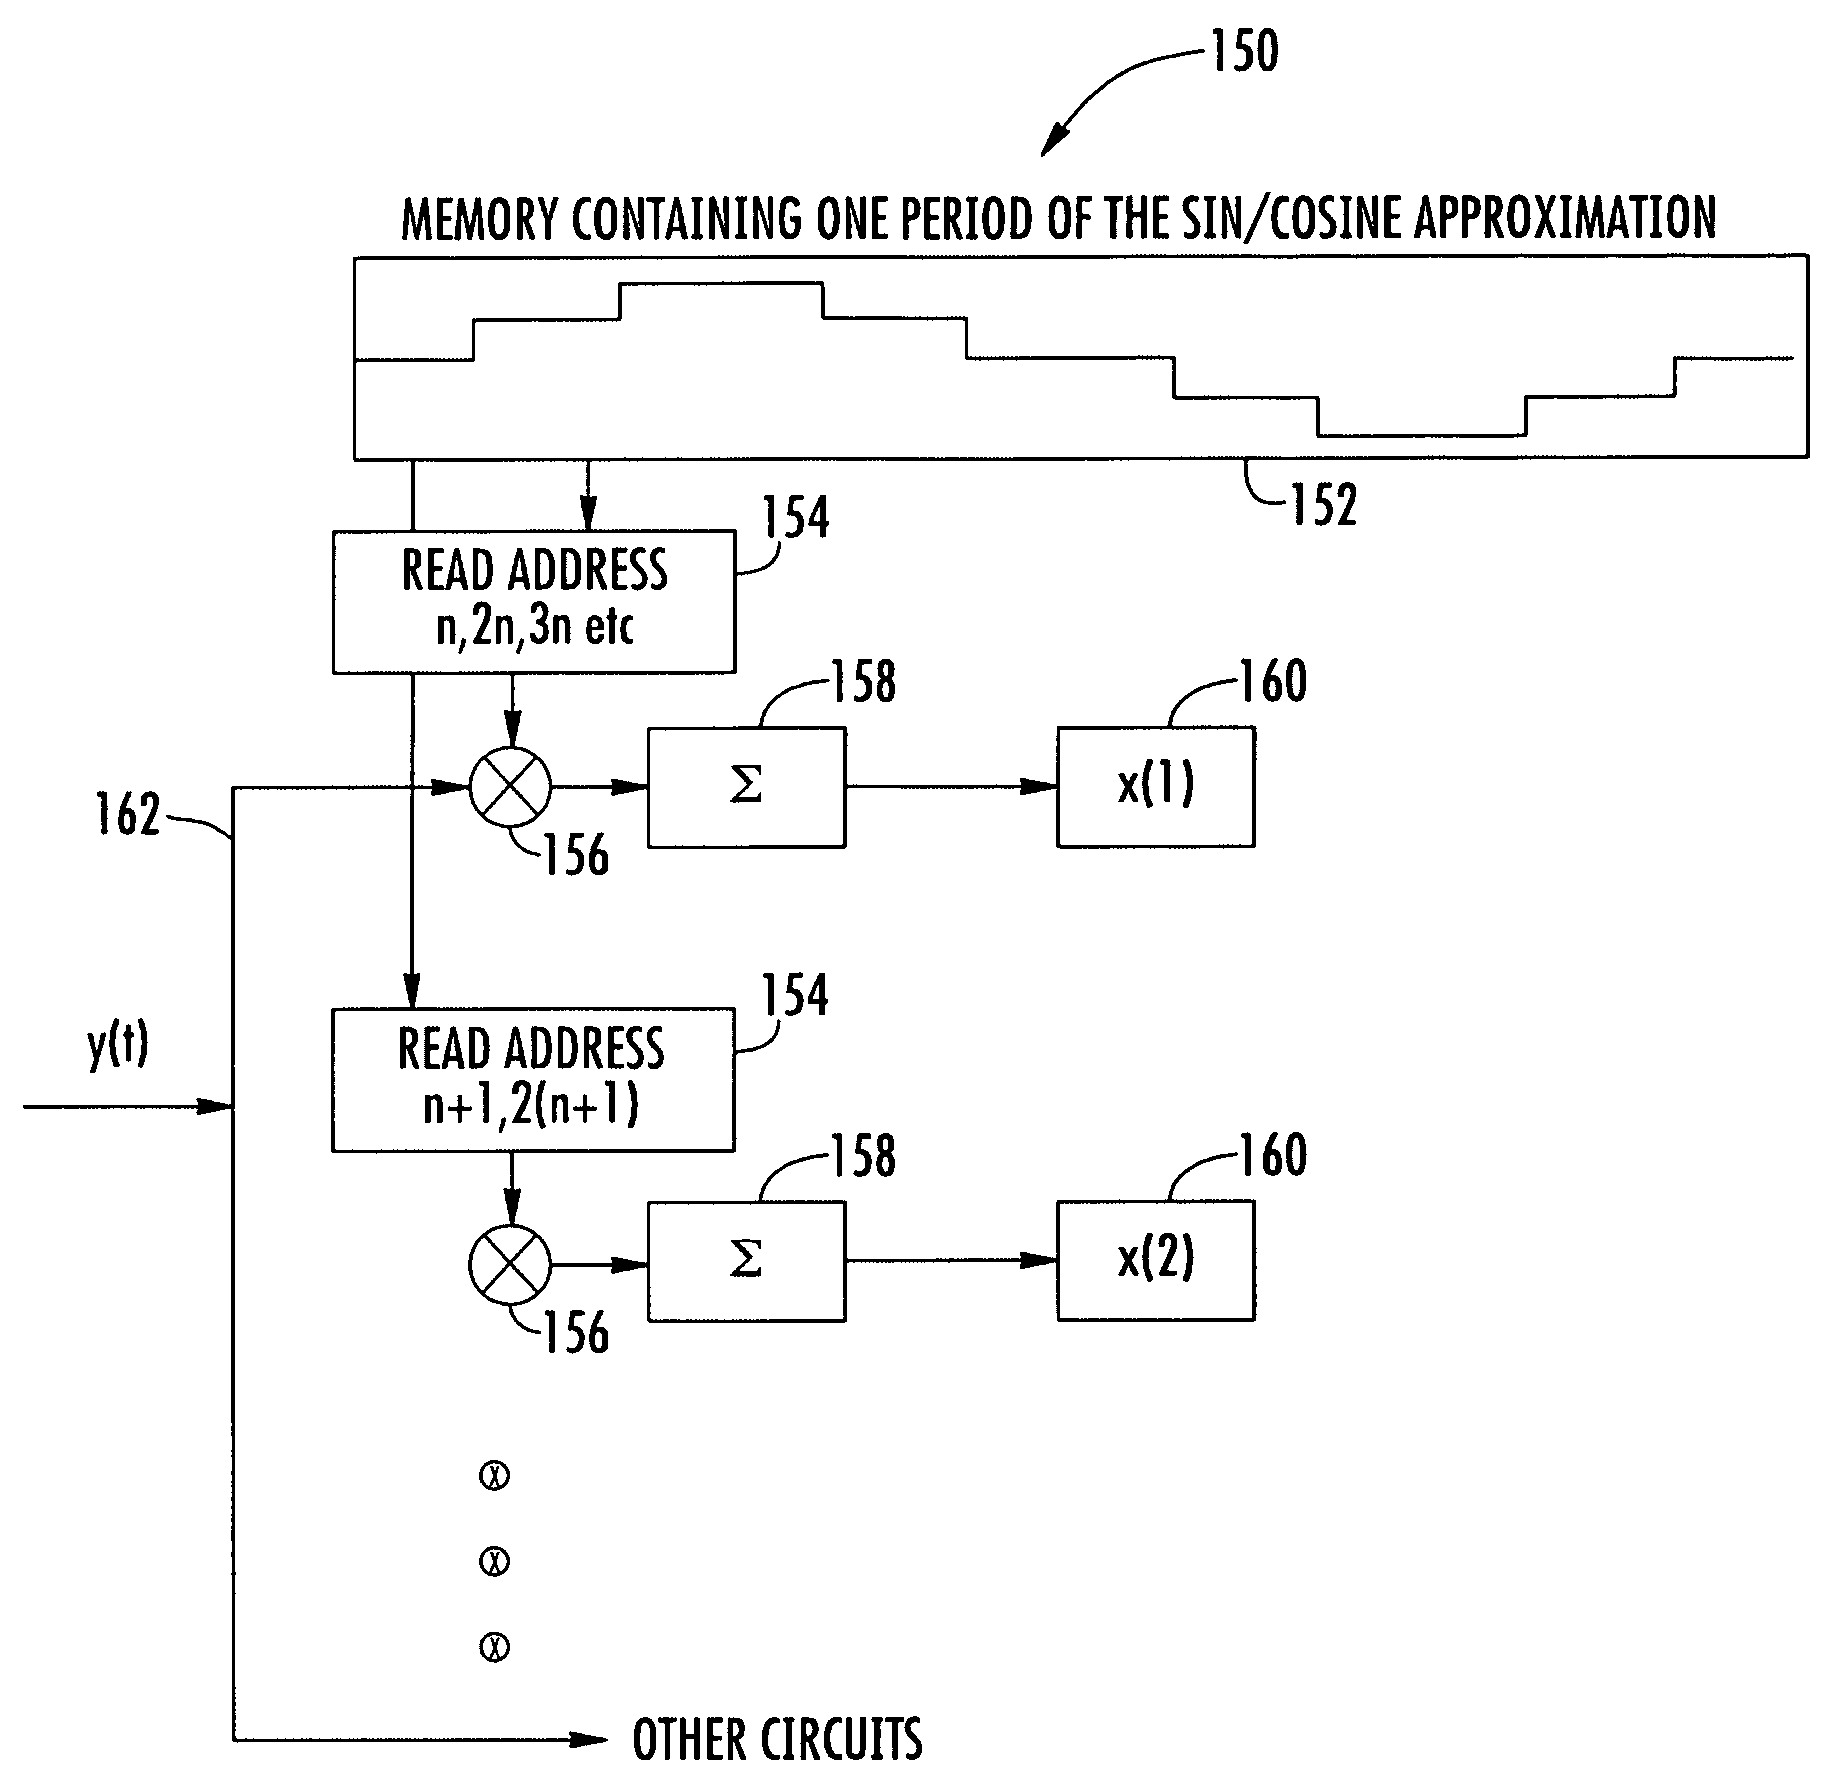 System and method for communicating data using efficient fast fourier transform (FFT) for orthogonal frequency division multiplexing (OFDM)